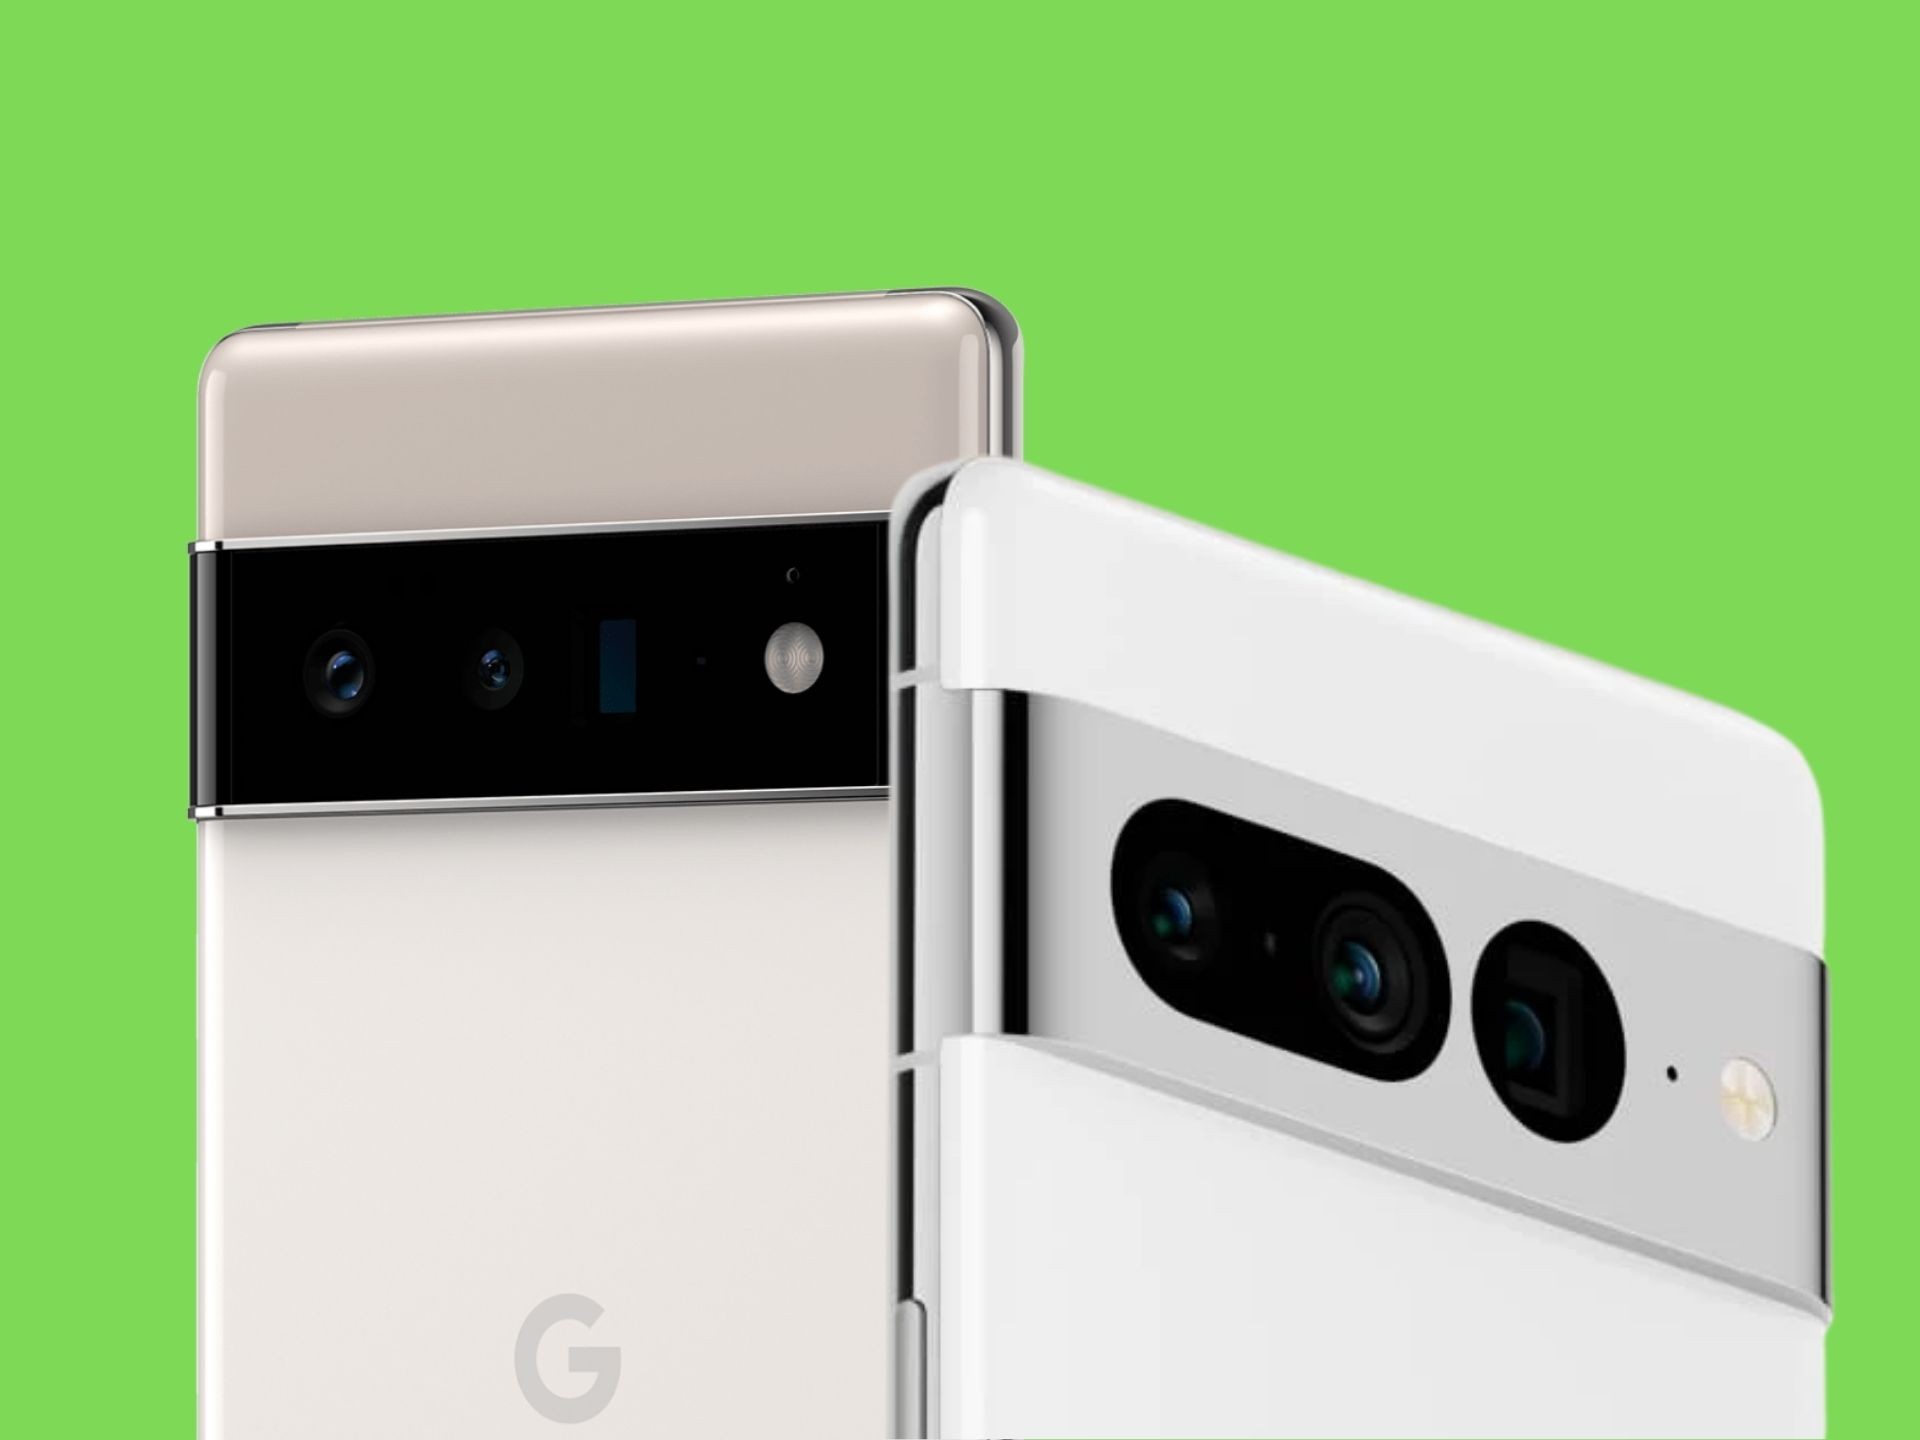 Should you buy the Google Pixel 6 and 6 Pro now or wait for Pixel 7 series?